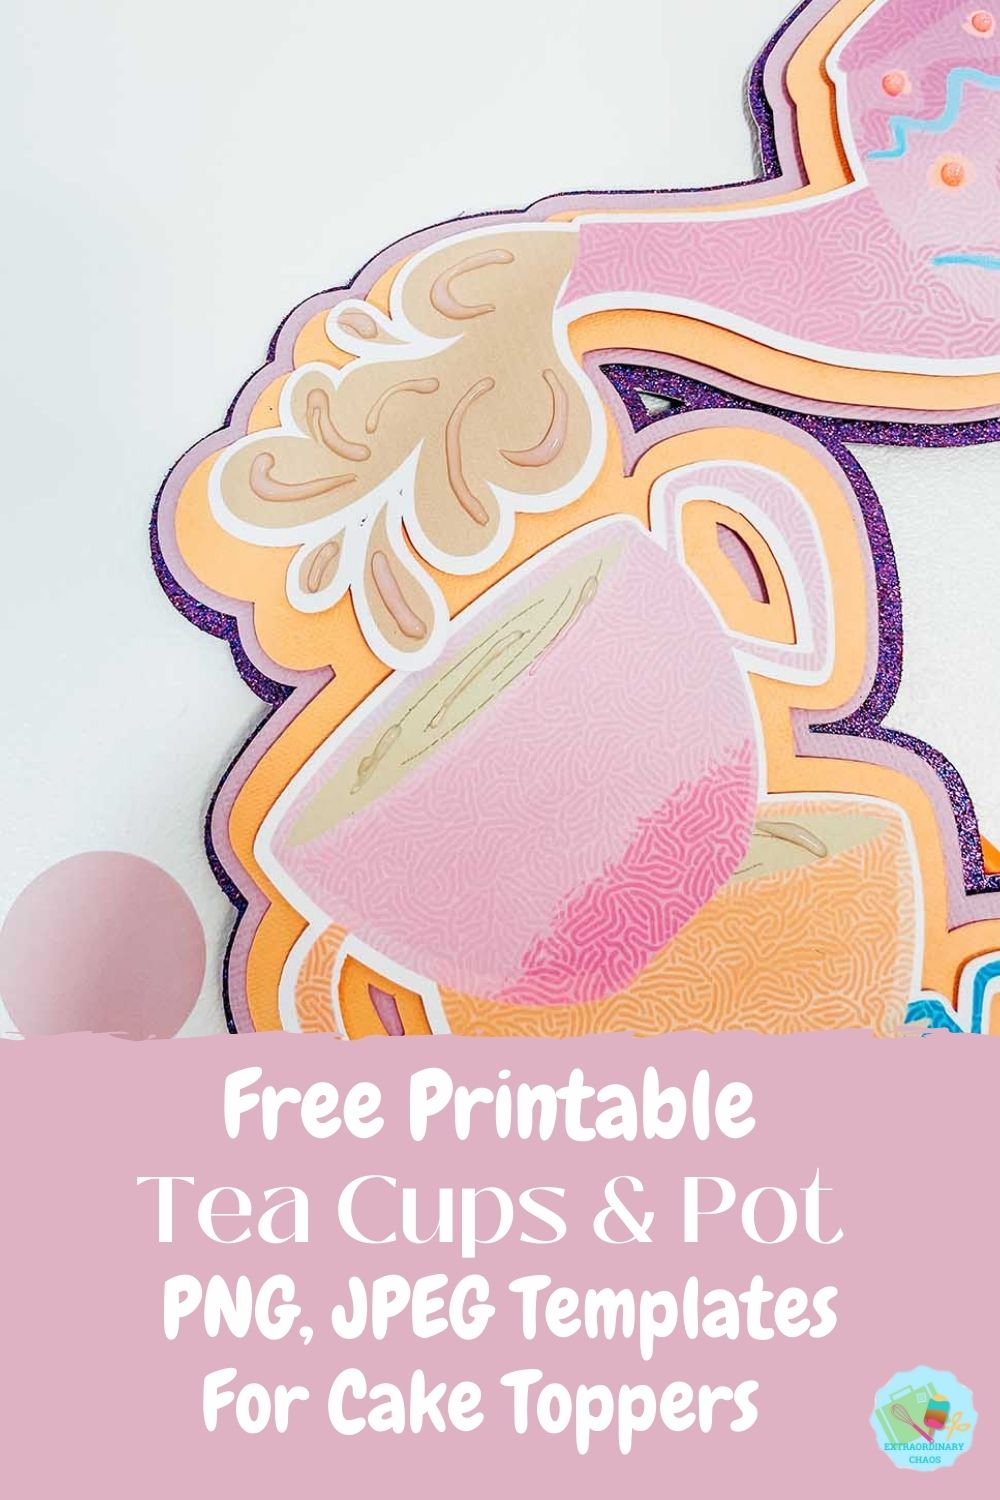 Tea Pot PNG For Crafting, Cards and Cake Toppers-2